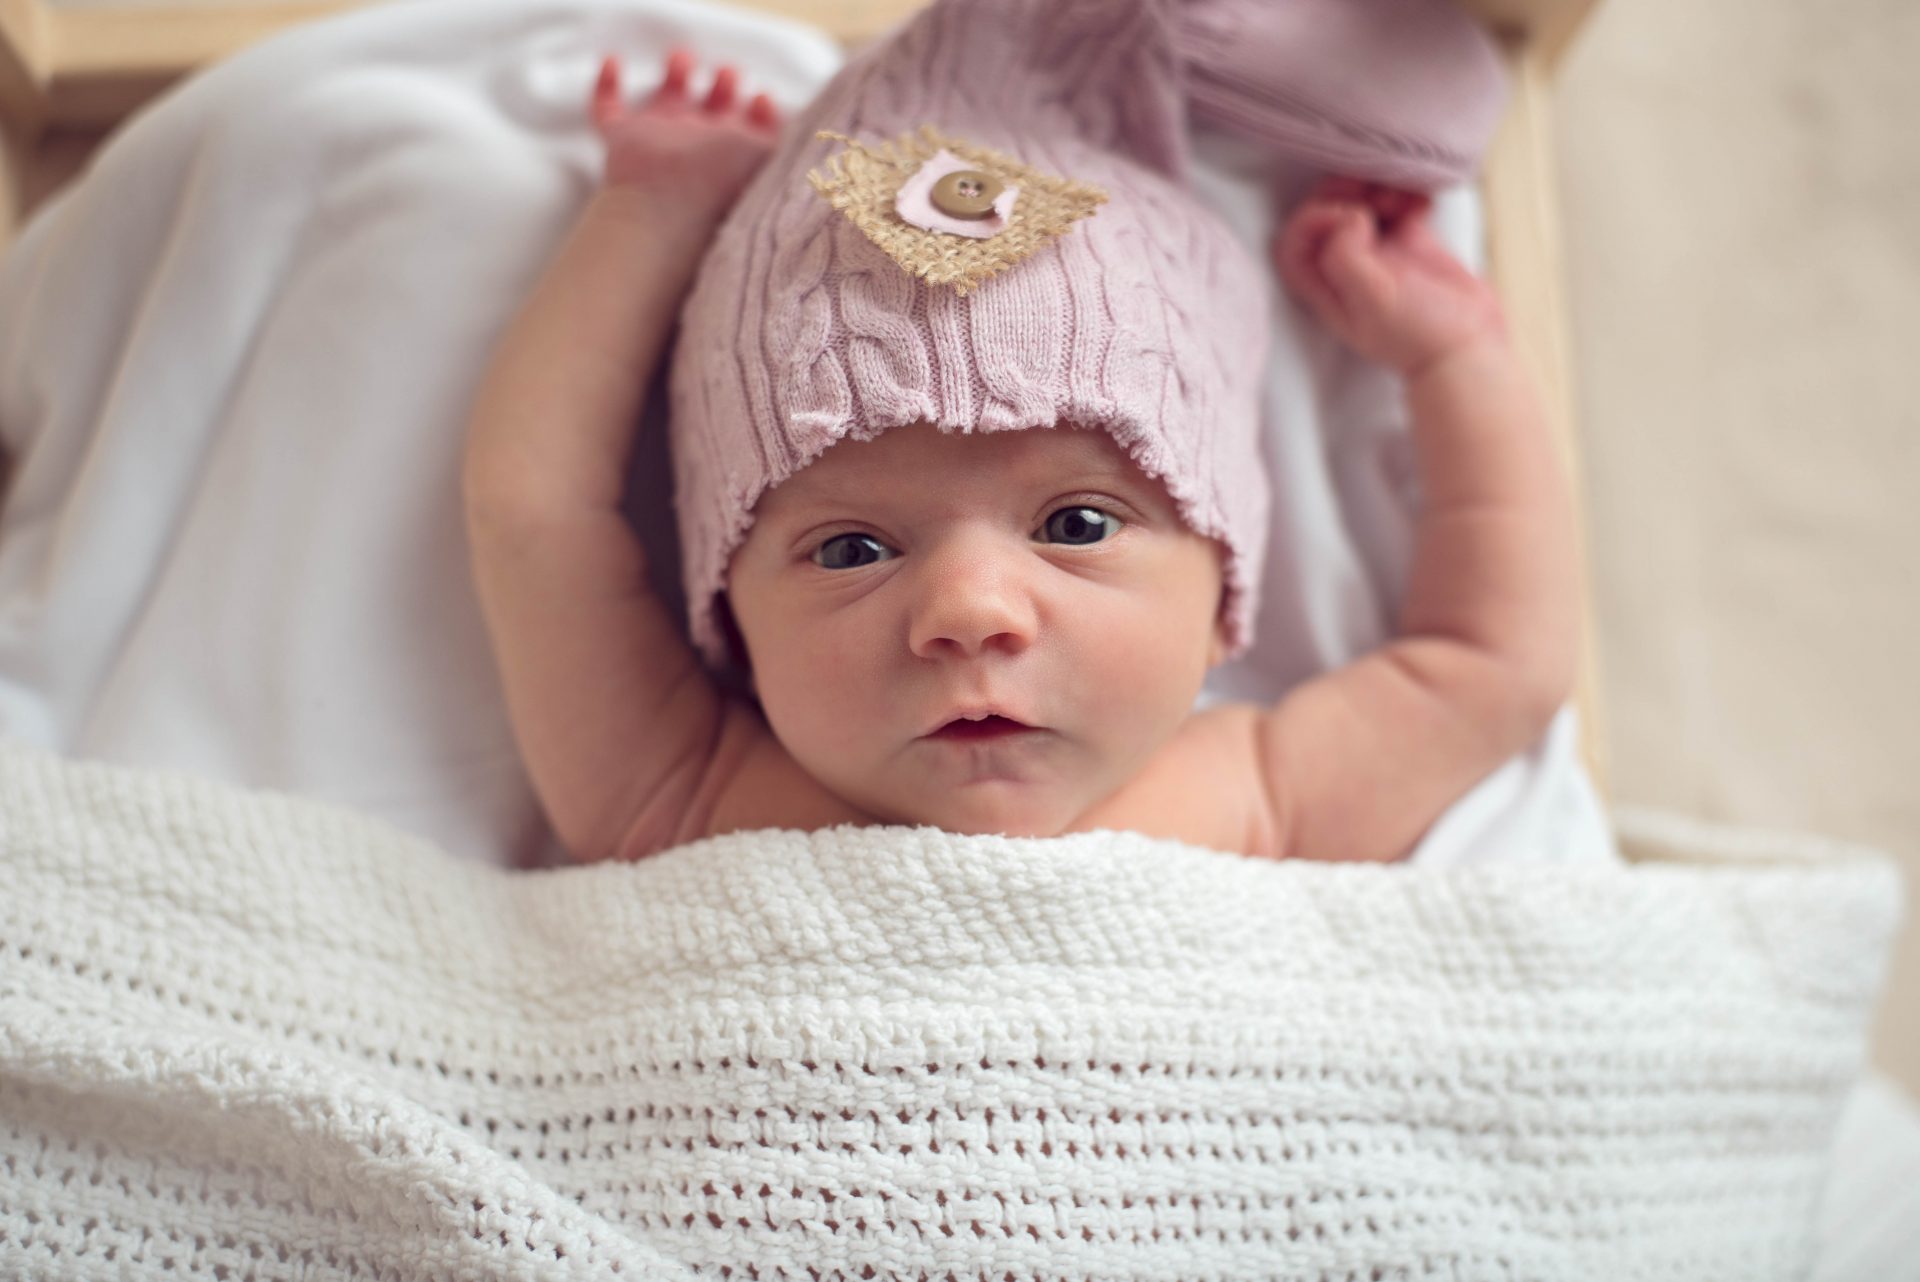 Newborn baby lying in toy bed with hands over her head and eyes wide open wearing pink cap | san diego newborn photography | www.babiesandbeauties.com